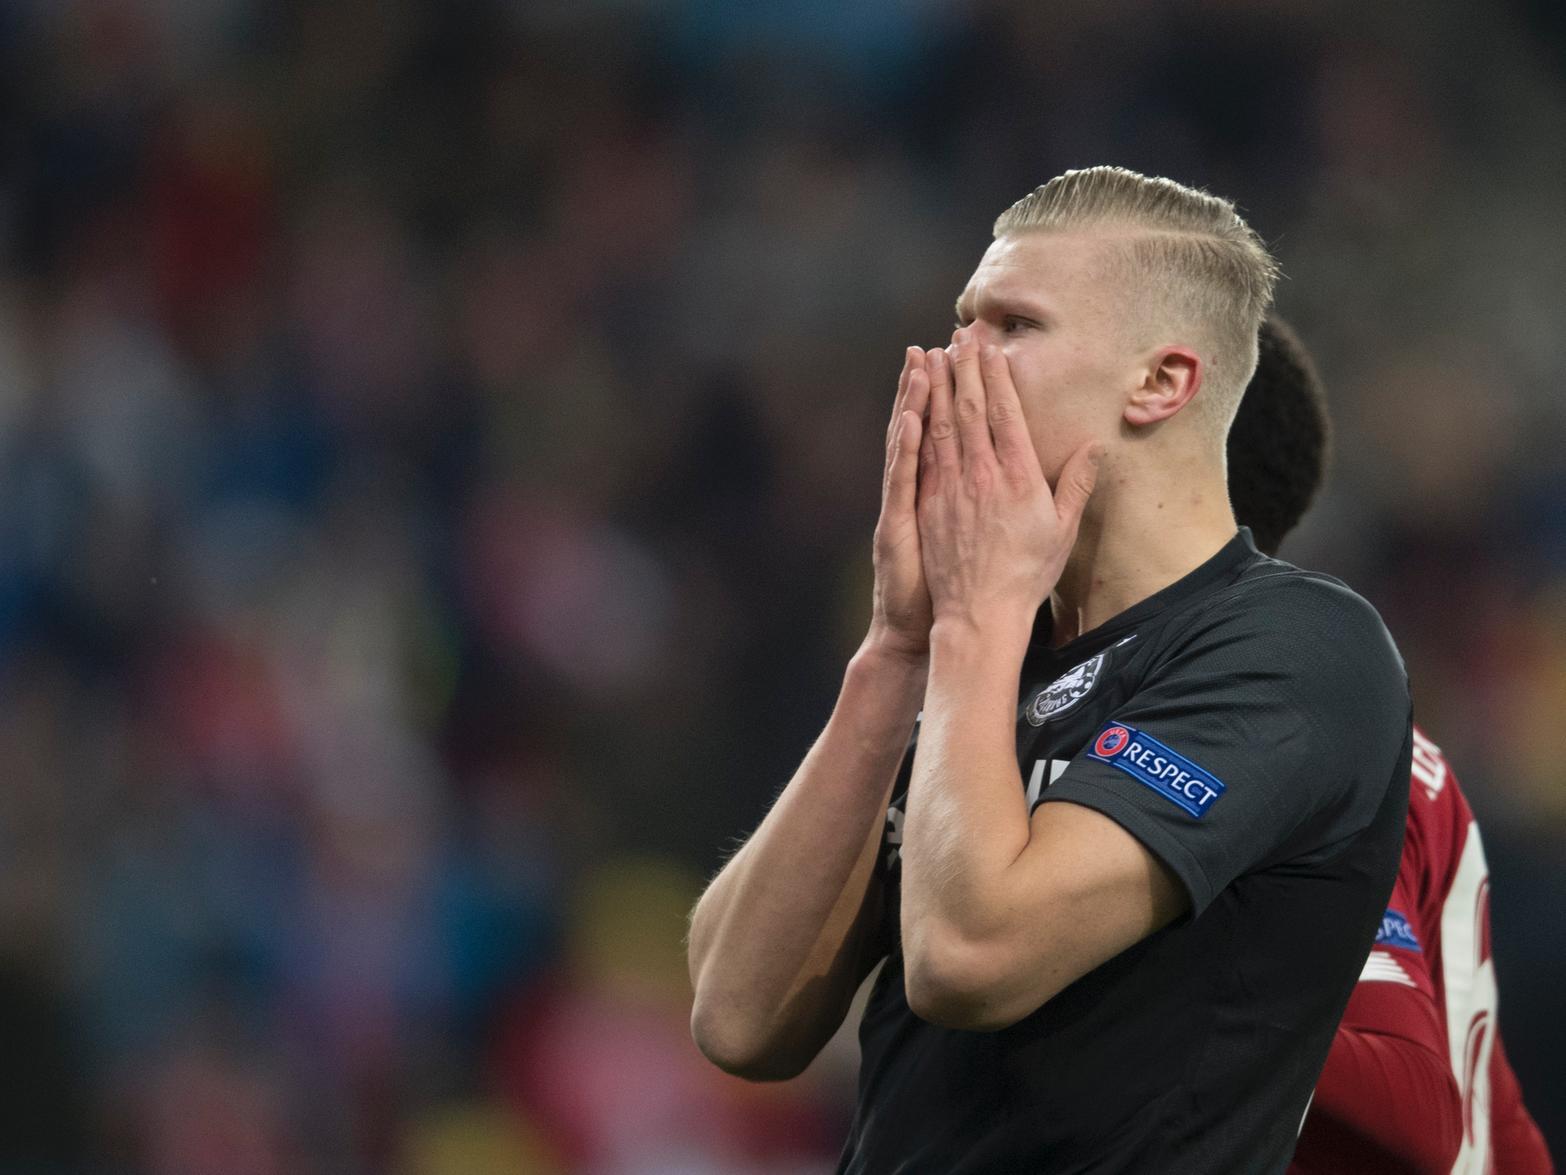 Manchester United boss Ole Gunnar Solskjaer says the club are willing to work with agent Mino Raiola to land 19-year-old striker Erling Haaland. (Sunday Mirror)